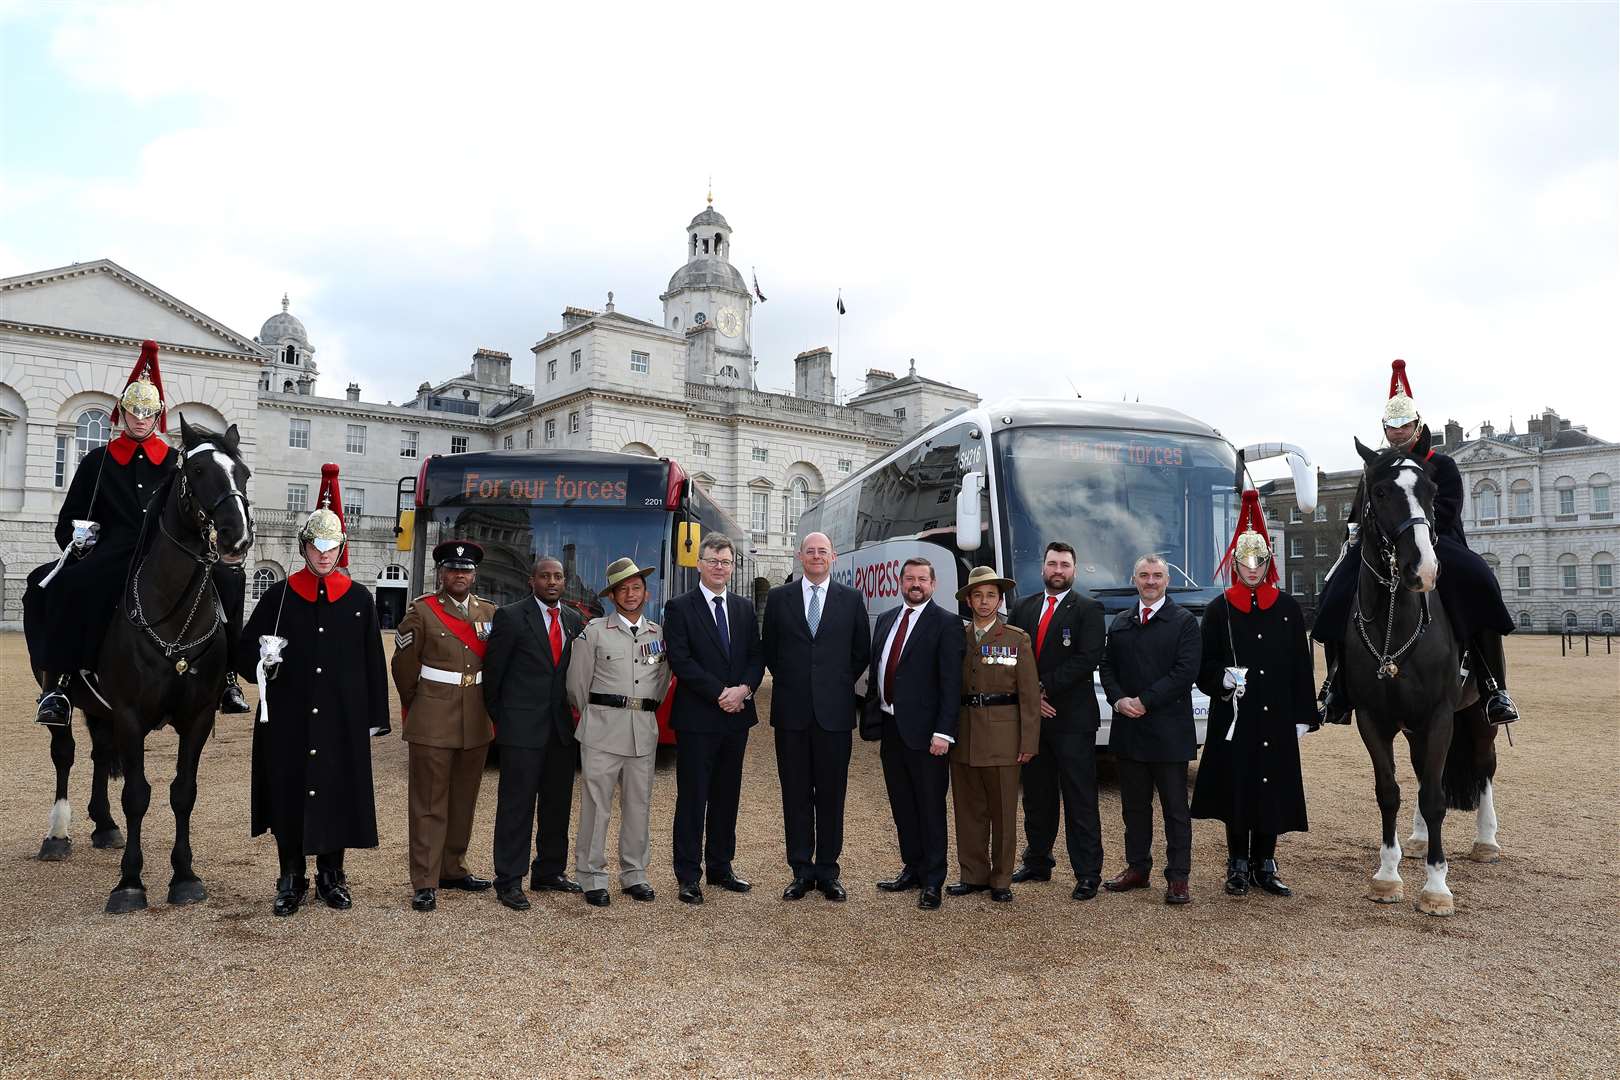 National Express Group bosses flanked National Express employees who formerly served in the forces and members of the Blues and Royals cavalry regiment, at Horseguards in London.